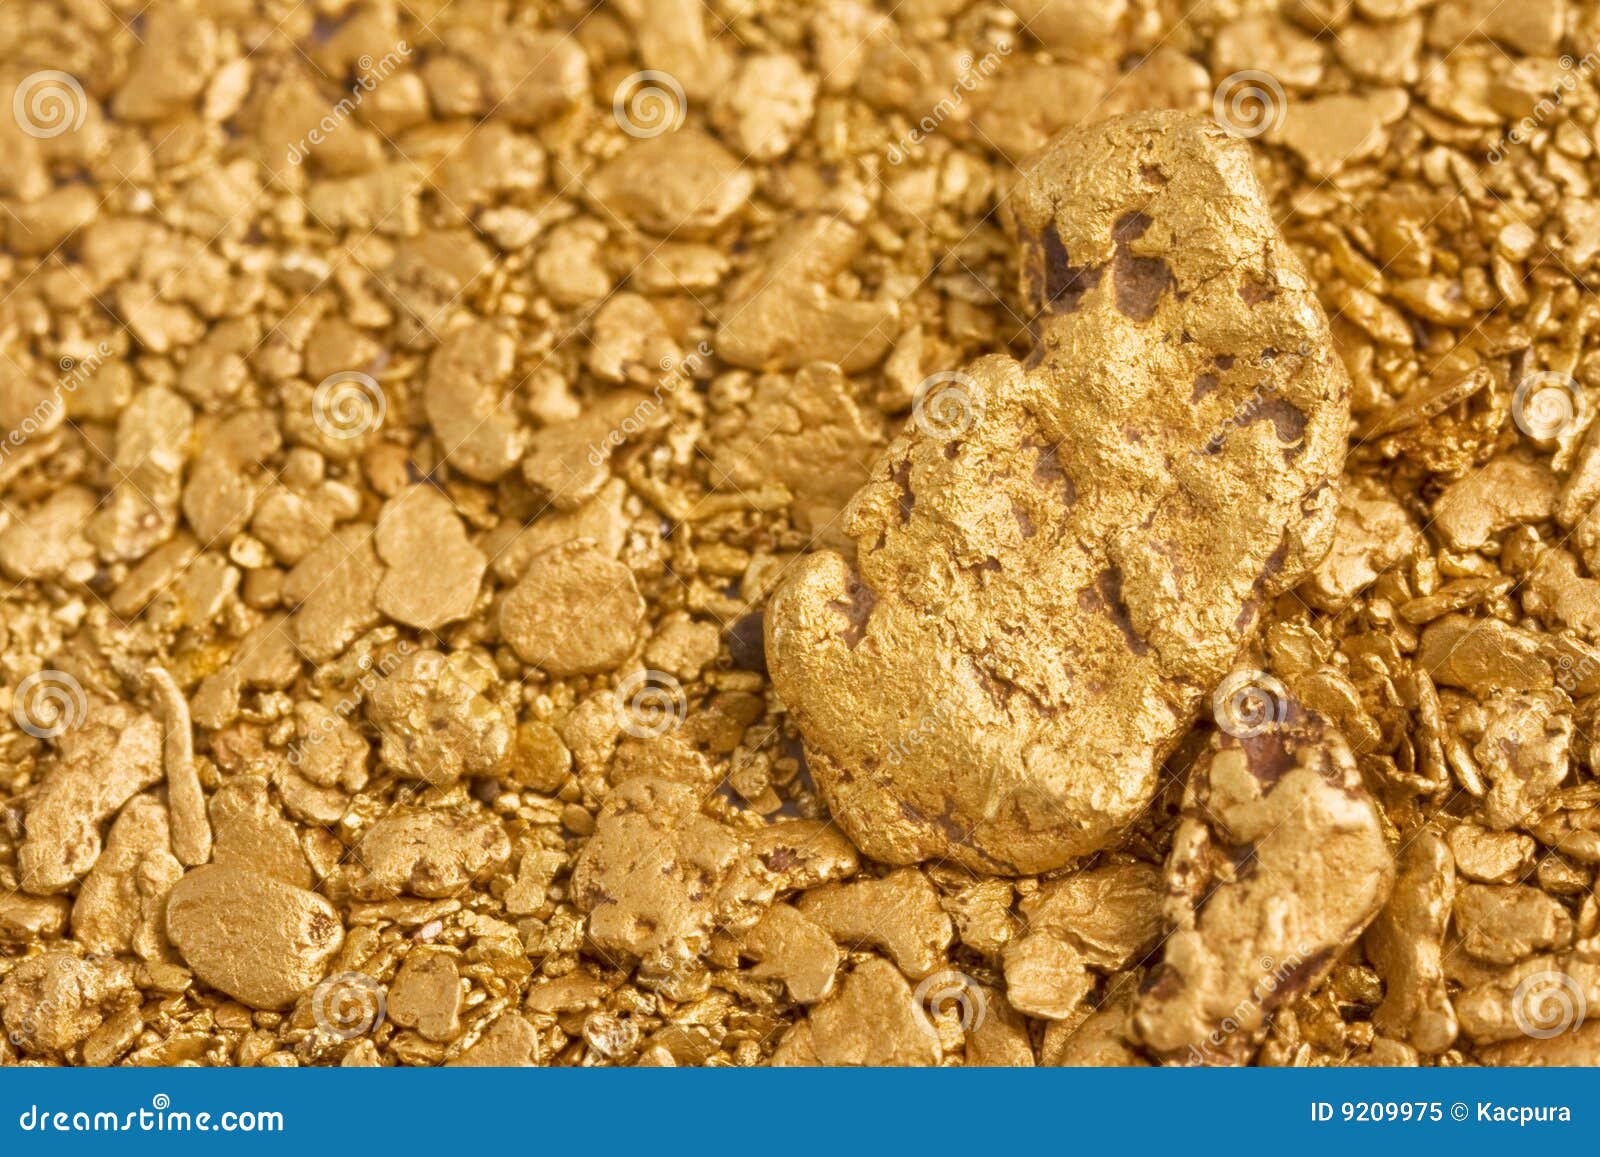 natural placer gold nuggets